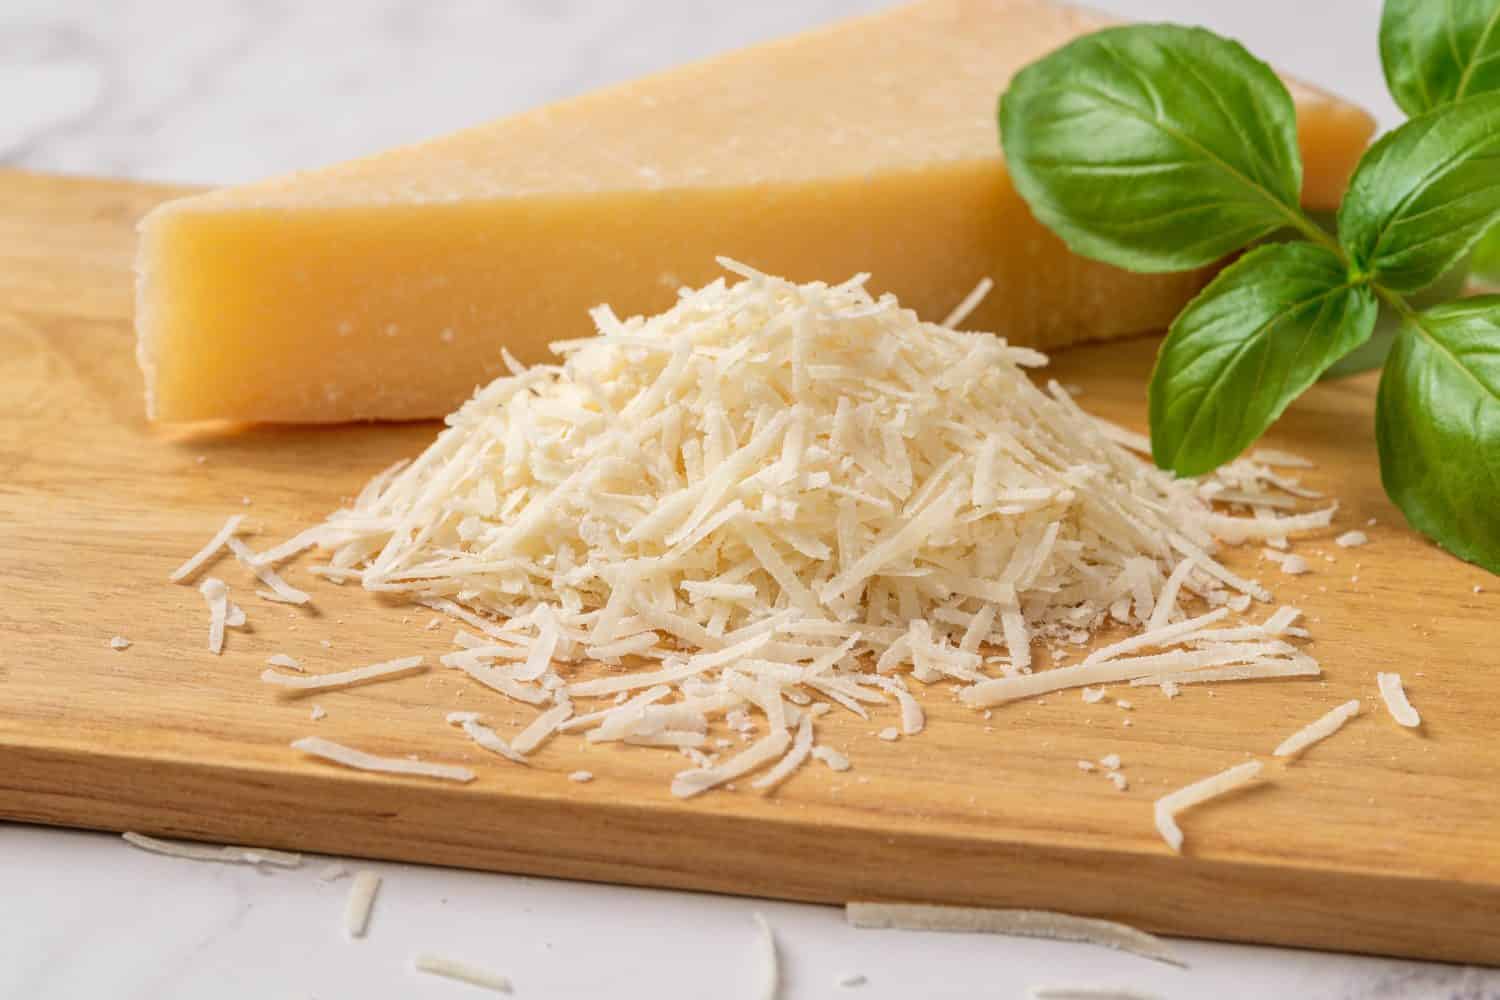 Shredded grana padano cheese on a cutting board. Italian parmesan cheese whole wedge and grated with green basil herb over wooden background. Delicious hard cheese. Dairy product. Front view.